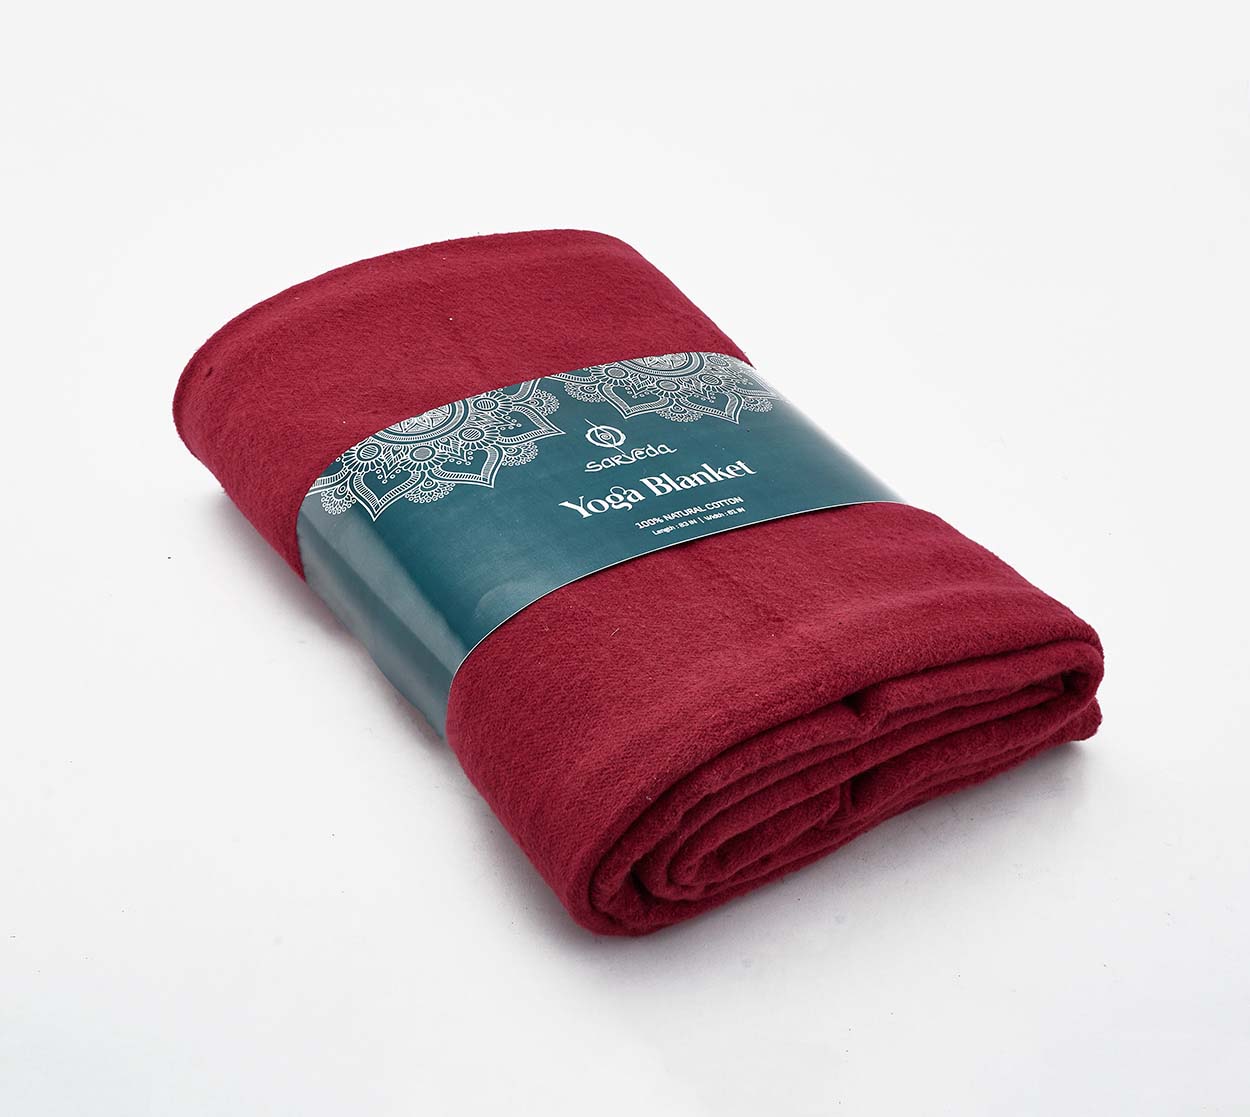 Yoga Blanket made from Organic Cotton - Sarveda